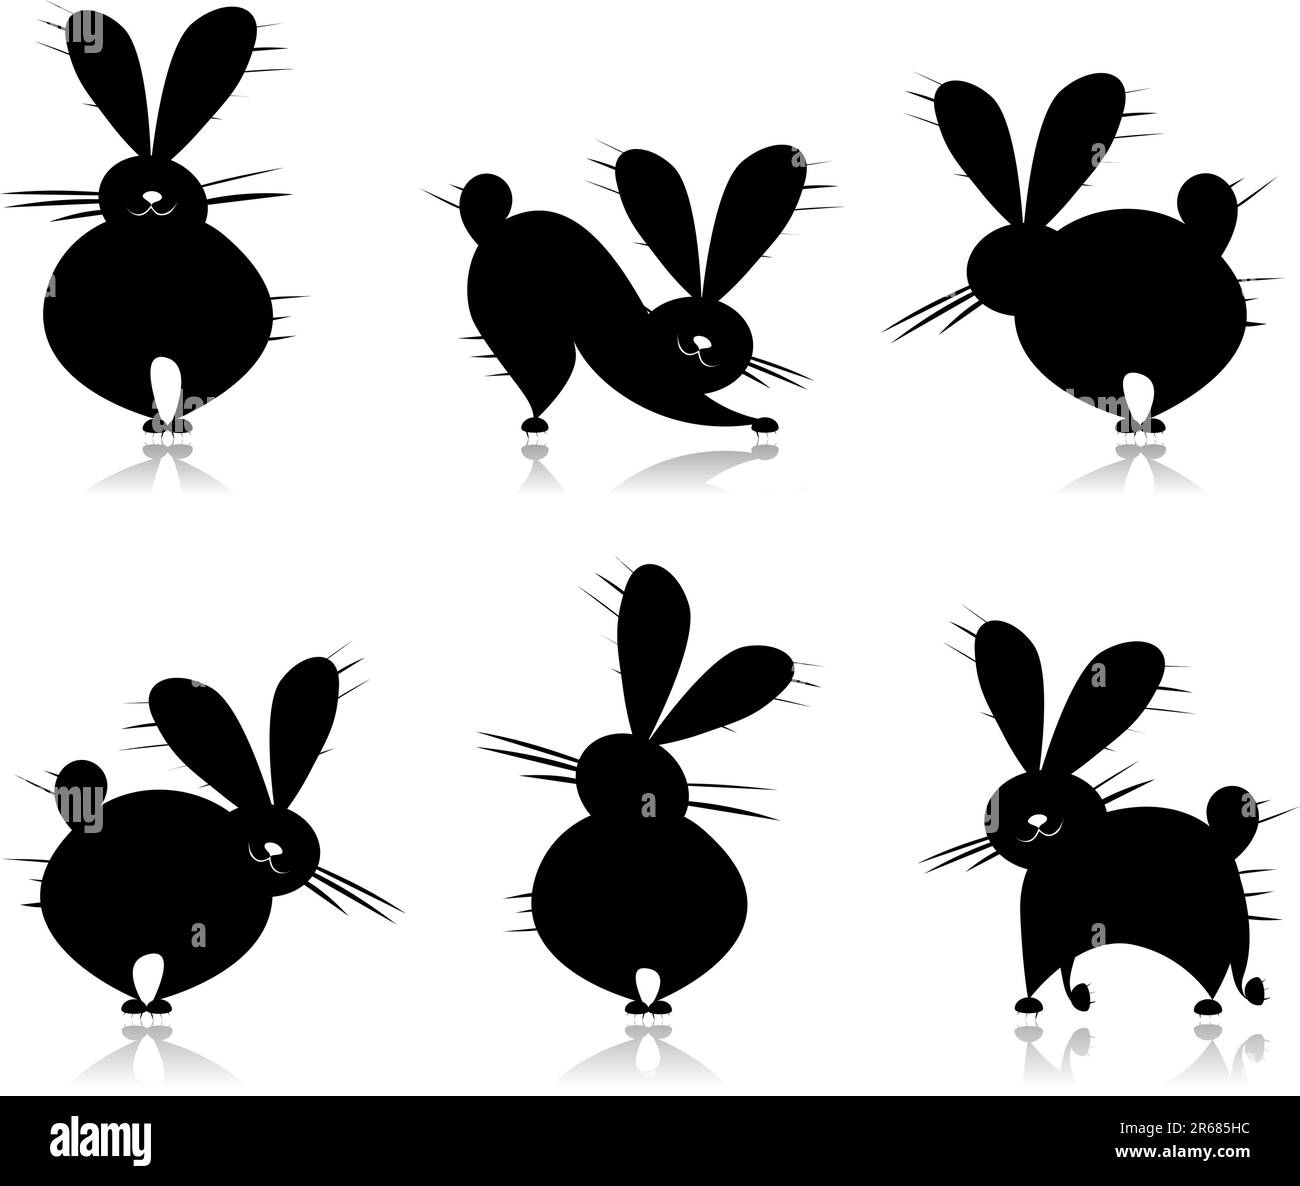 Funny rabbit's silhouettes for your design Stock Vector